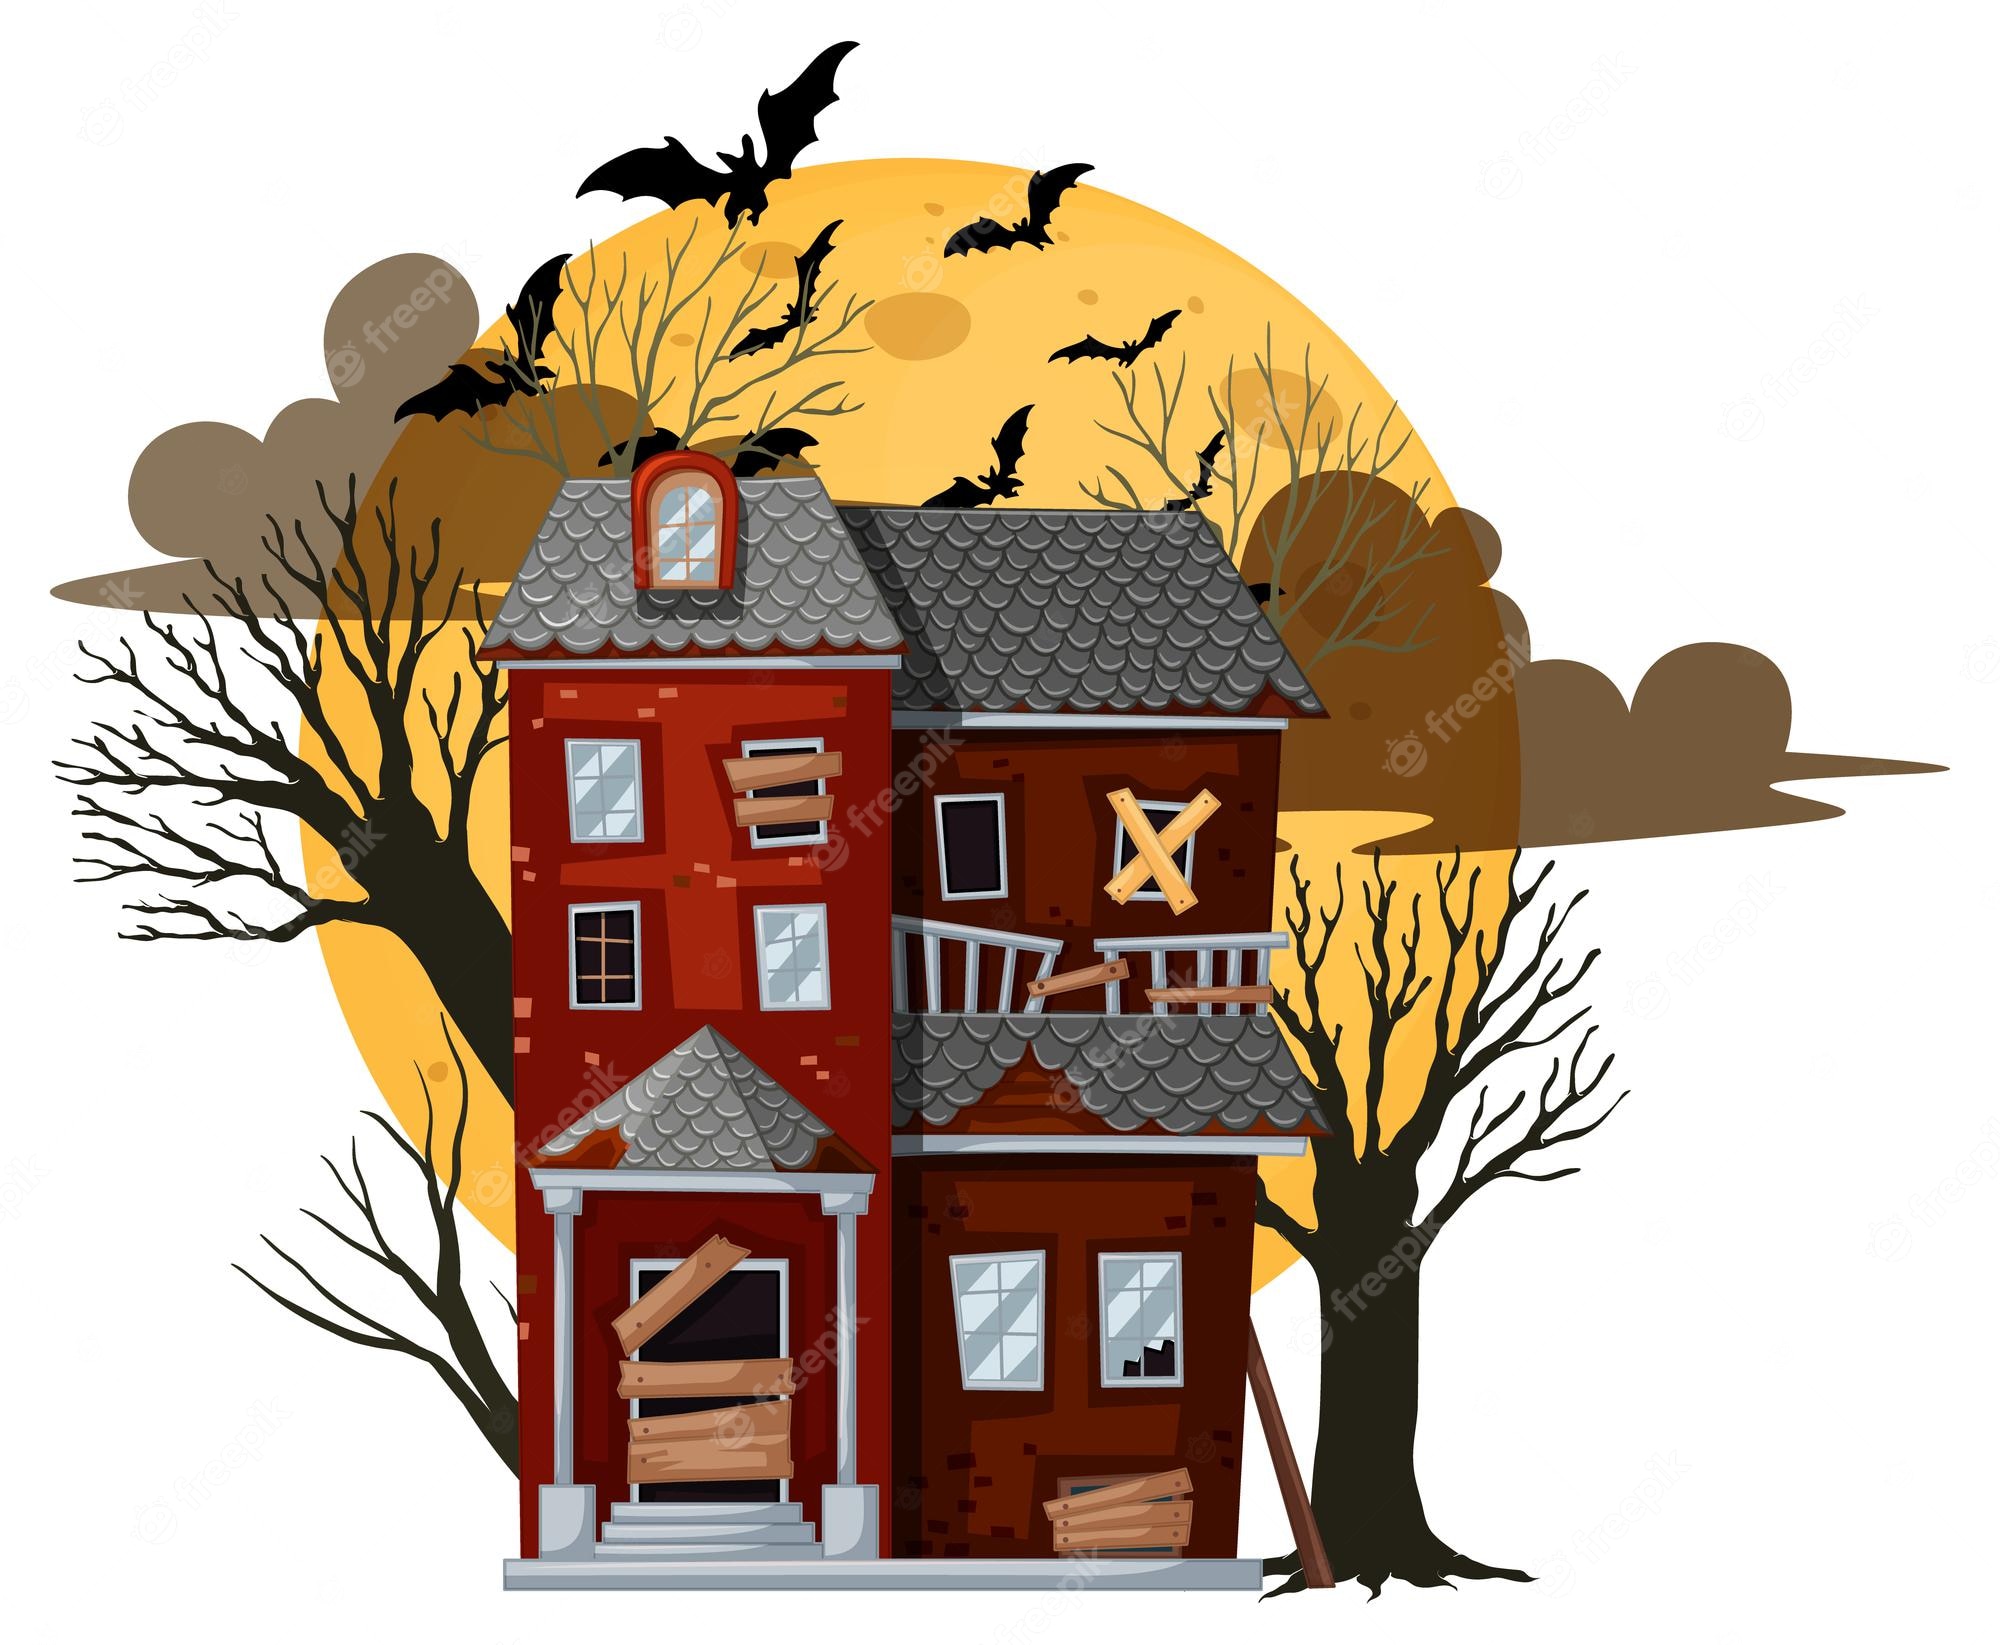 Halloween Haunted House PNG, Clipart, Encapsulated Postscript - Clip ...